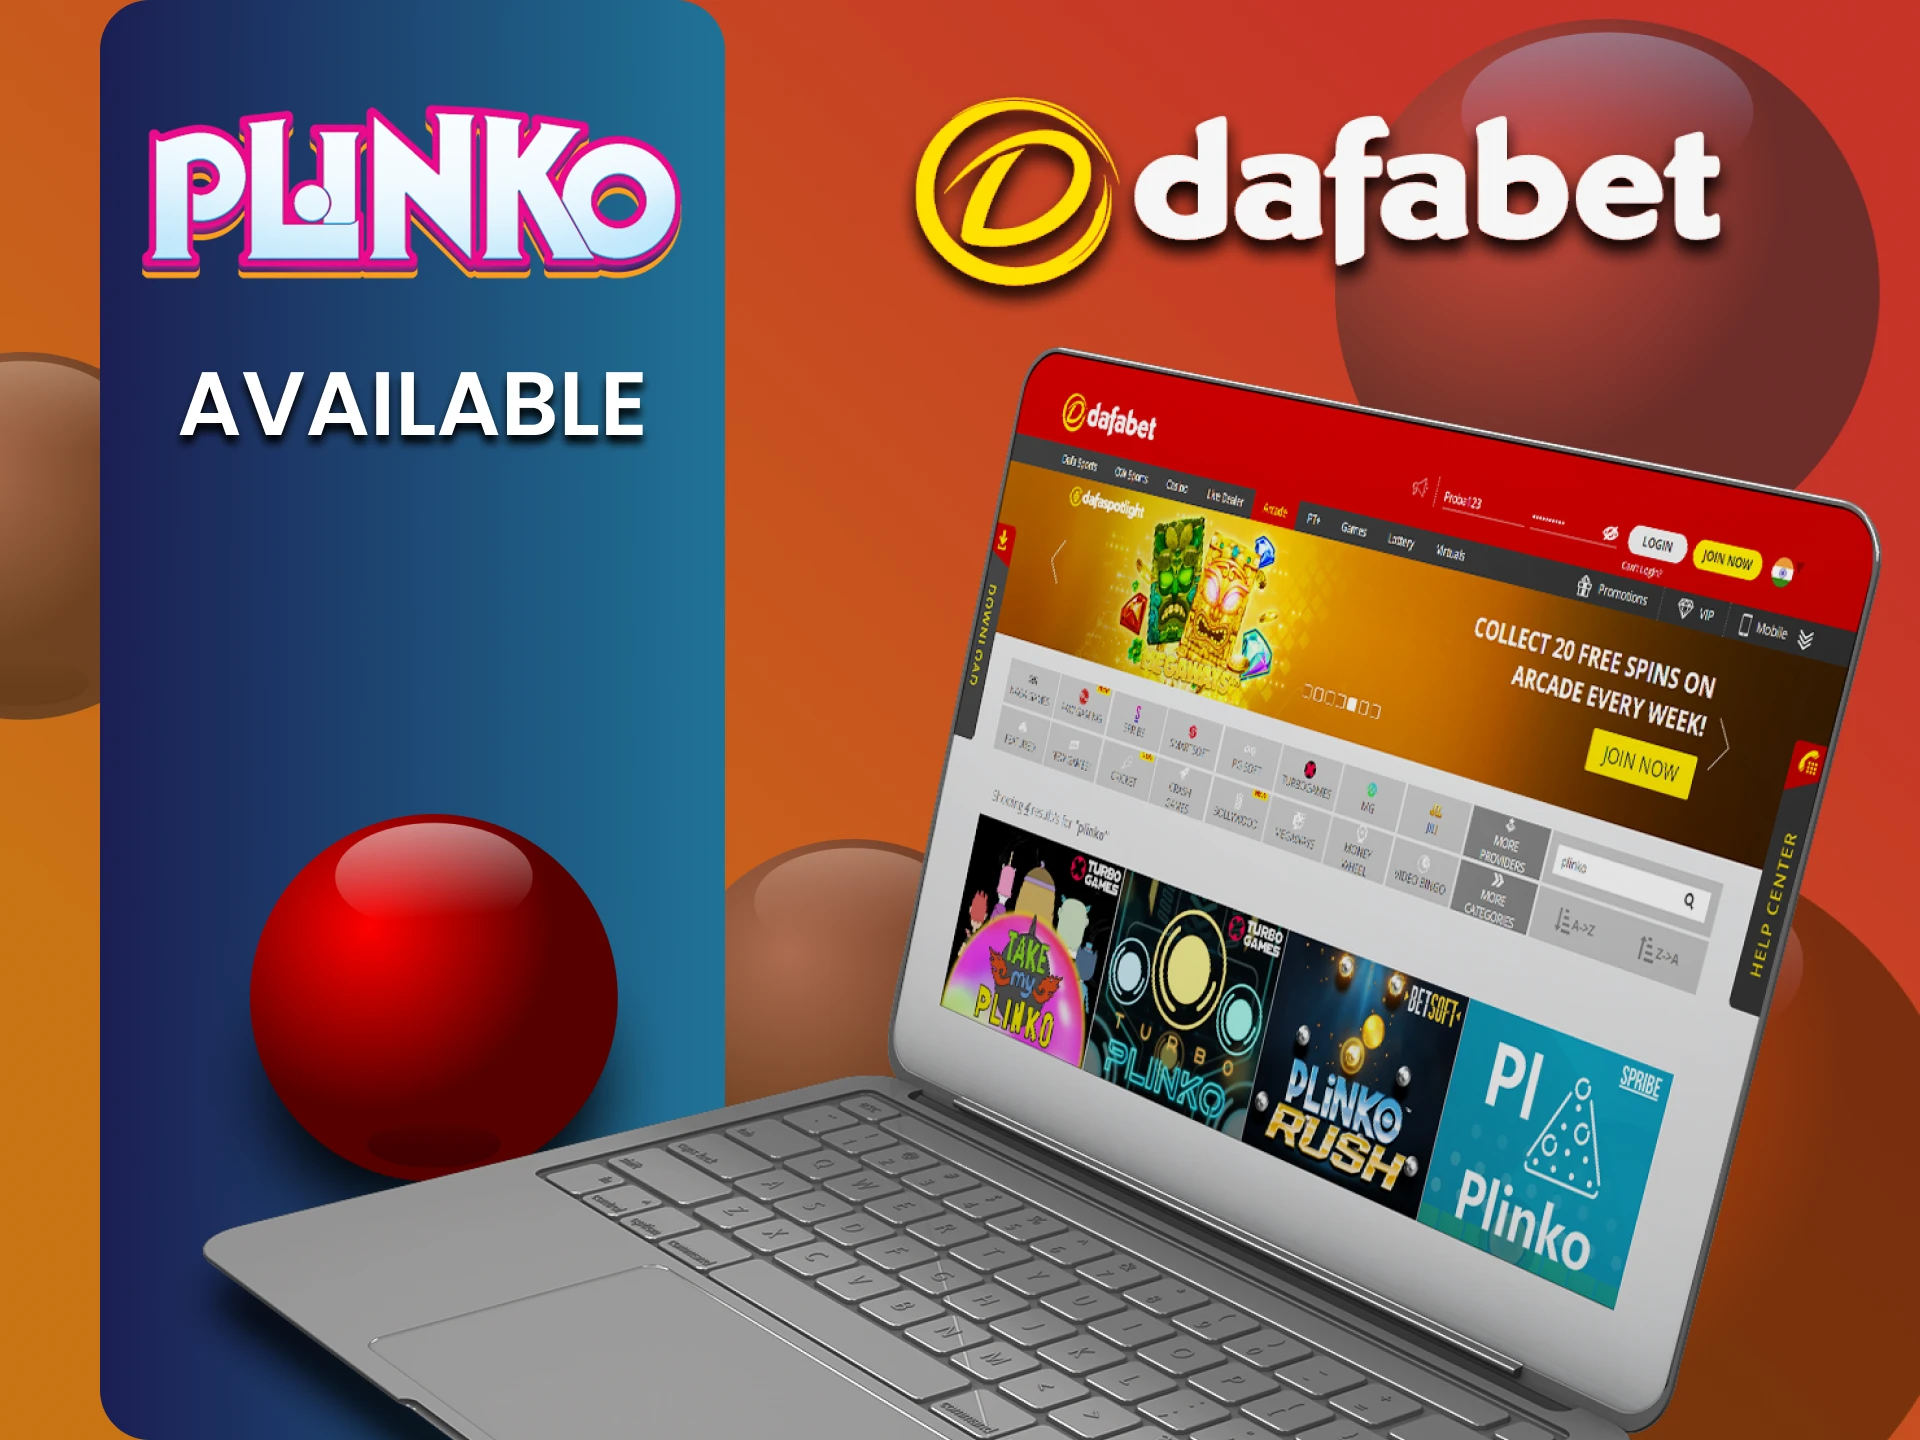 We will show you what types of Plinko are available on Dafabet.